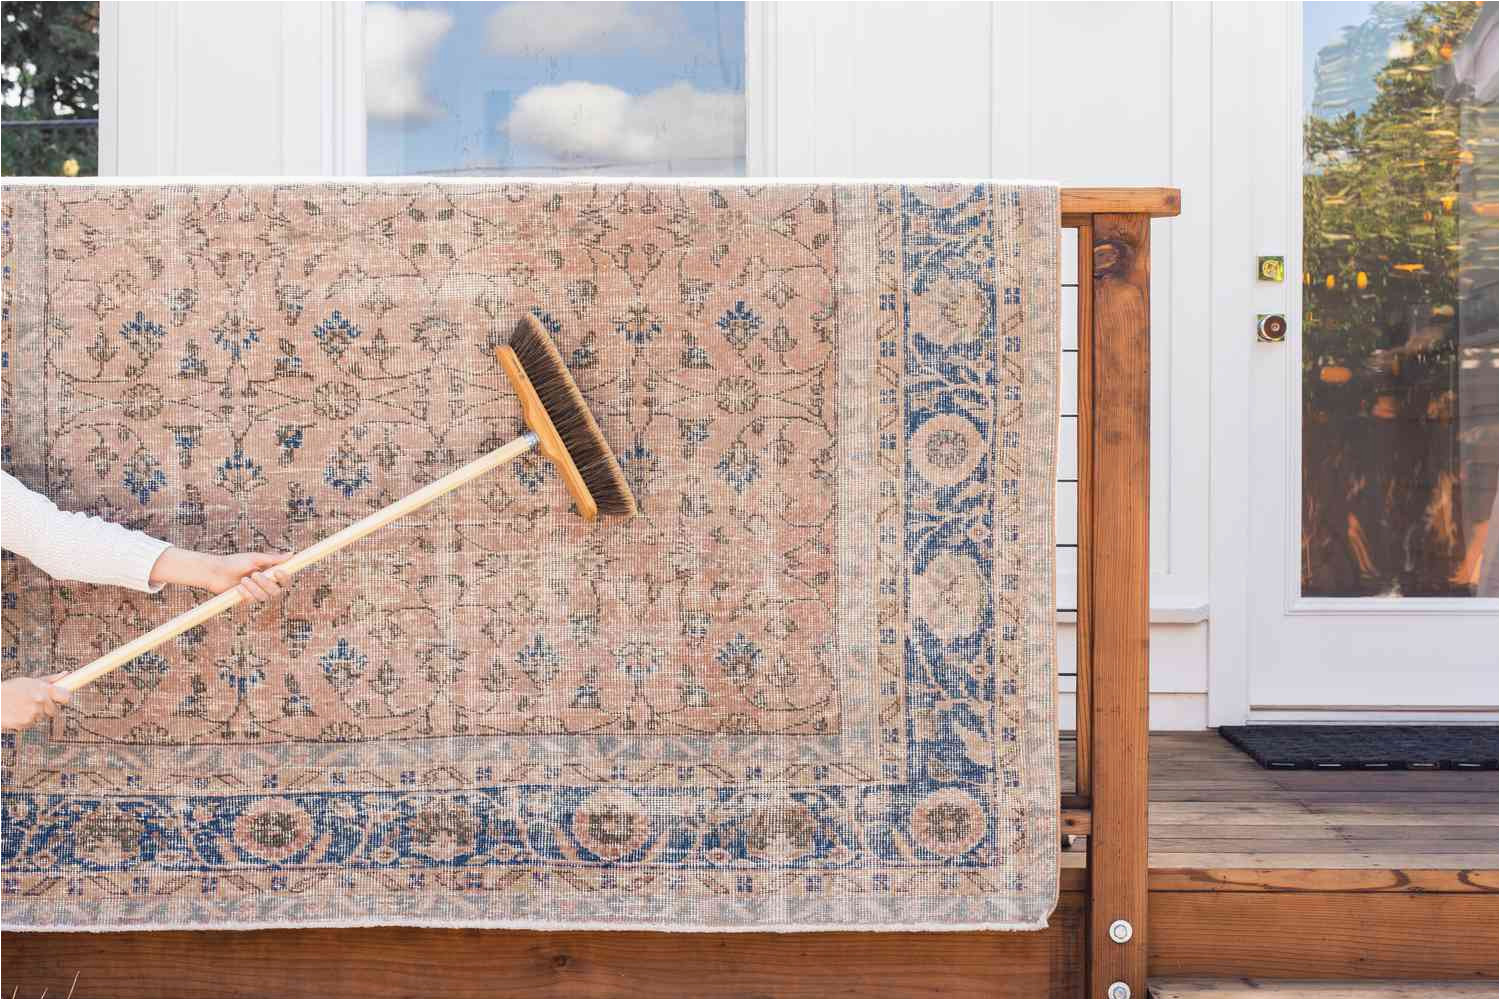 Can You Steam Clean Wool area Rugs How to Clean A Wool Rug with Household Items